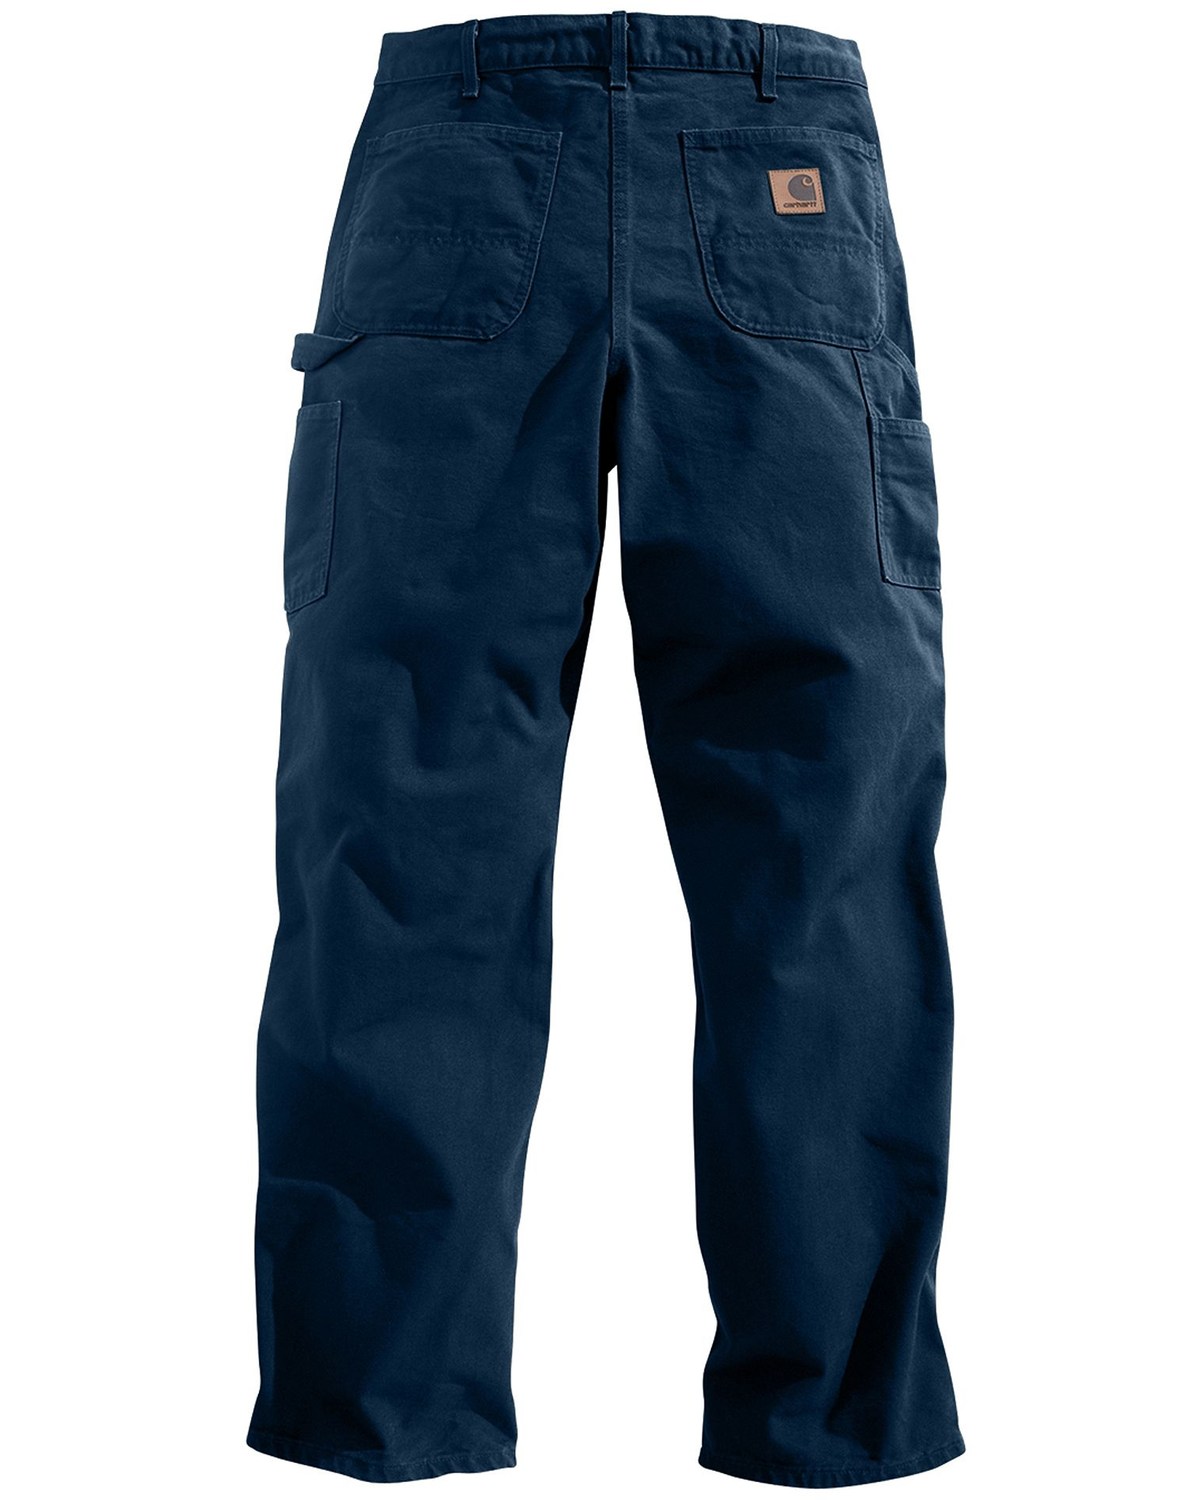 Carhartt Mens Washed Duck Work Dungaree Pant 